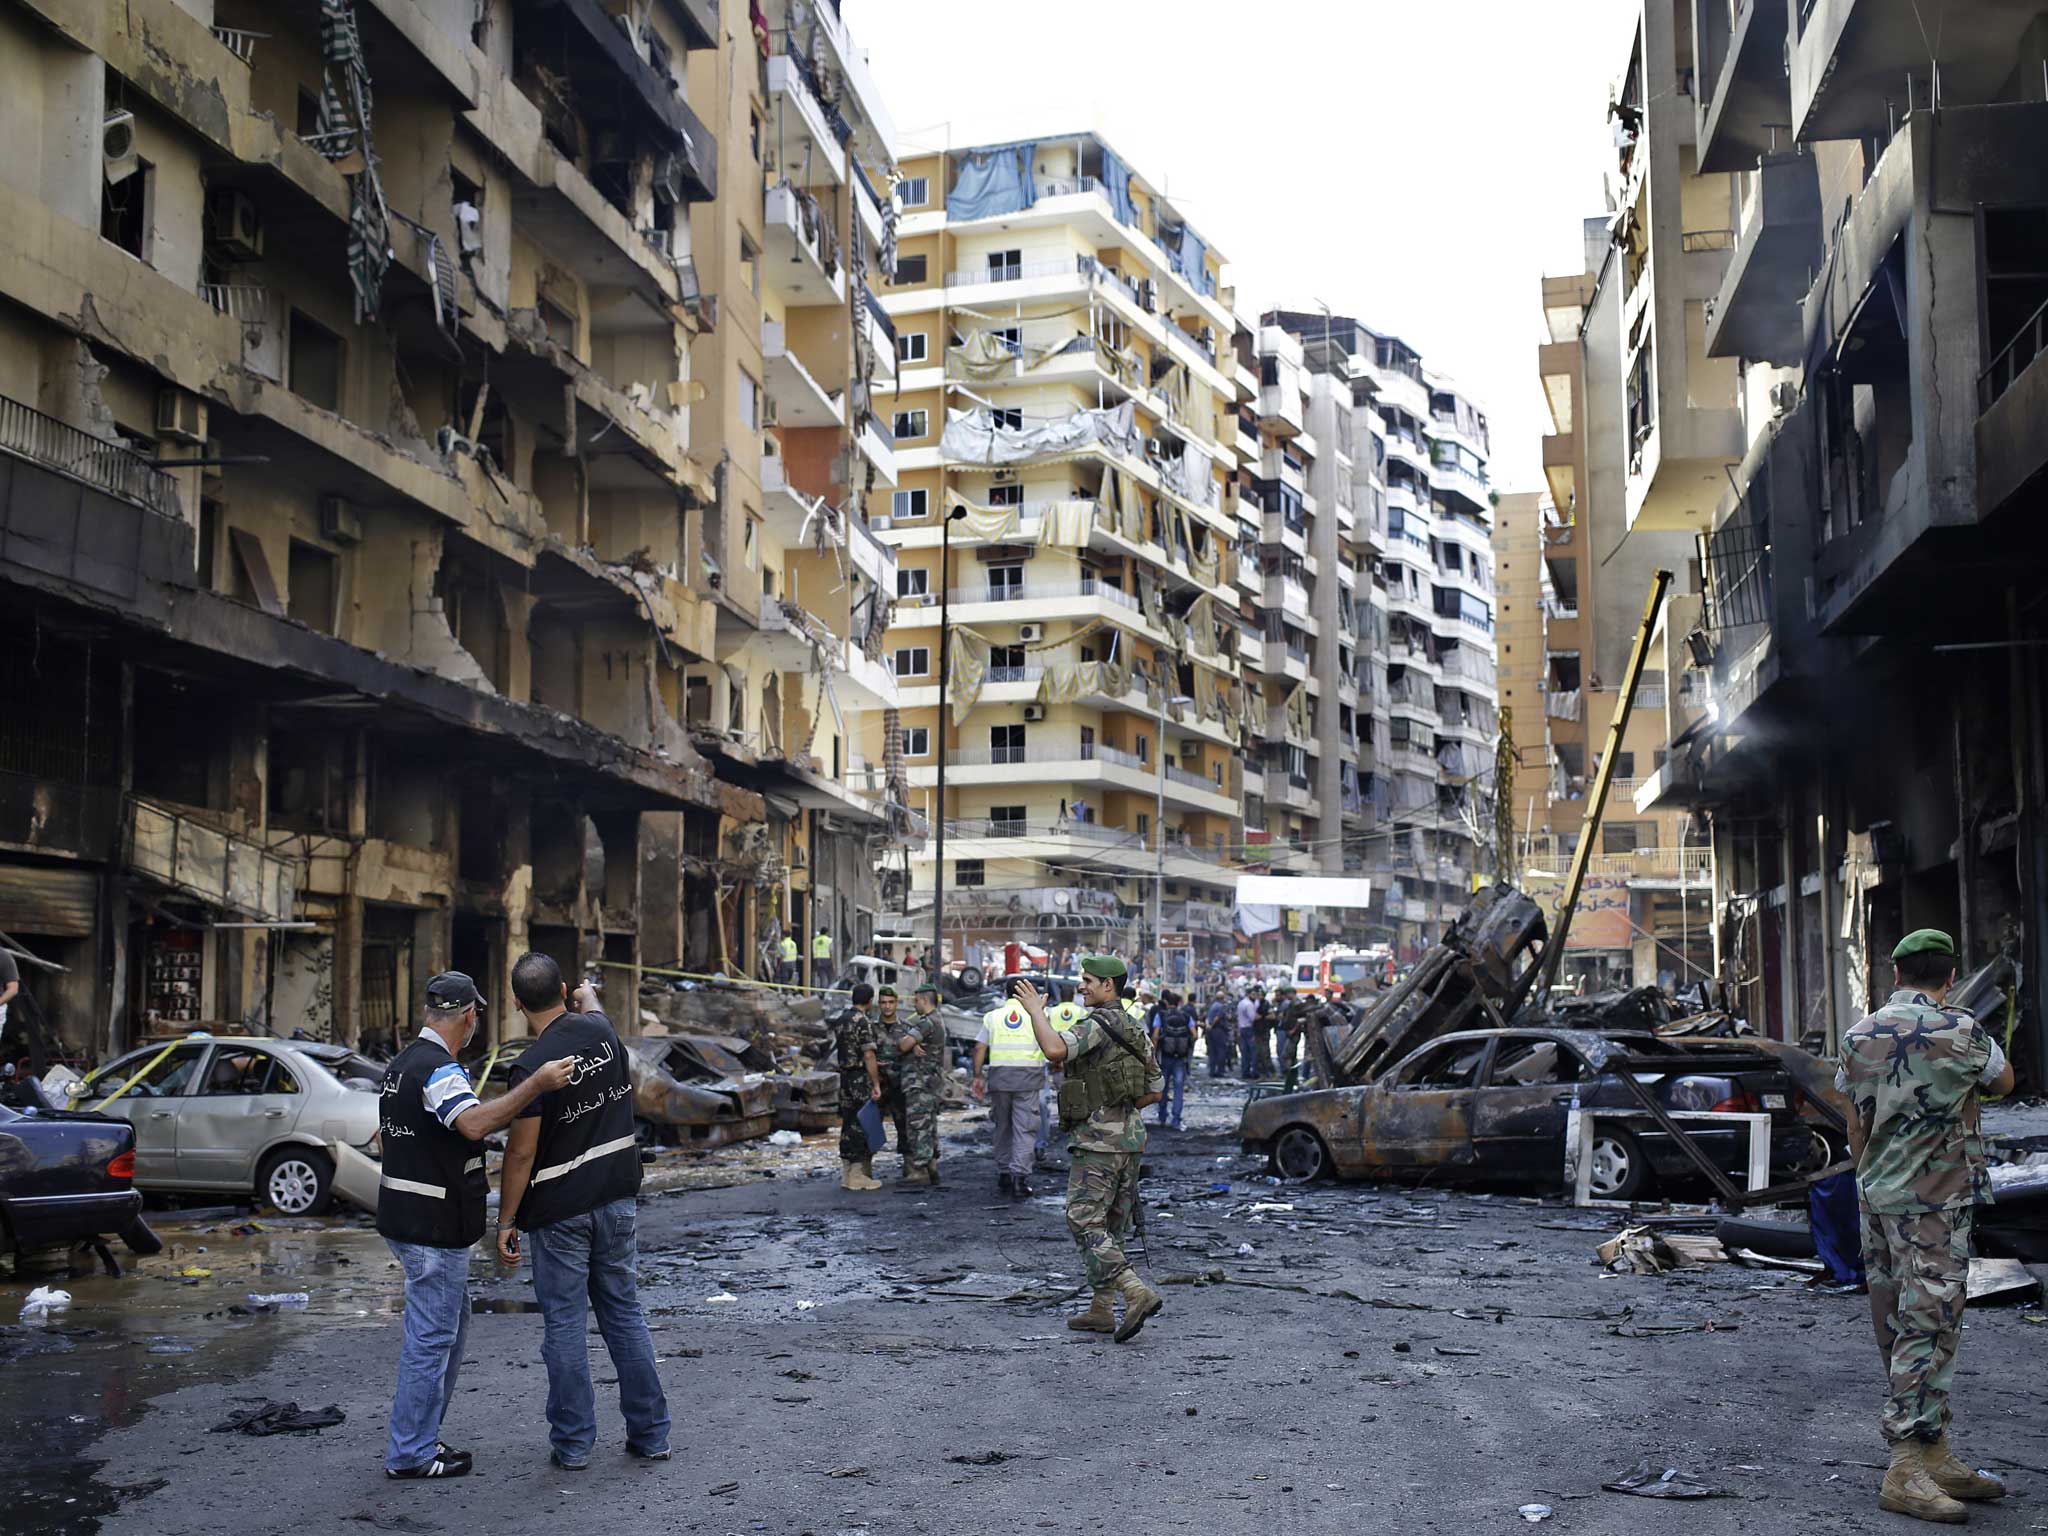 Lebanese army investigators inspect the site of a car bomb explosion